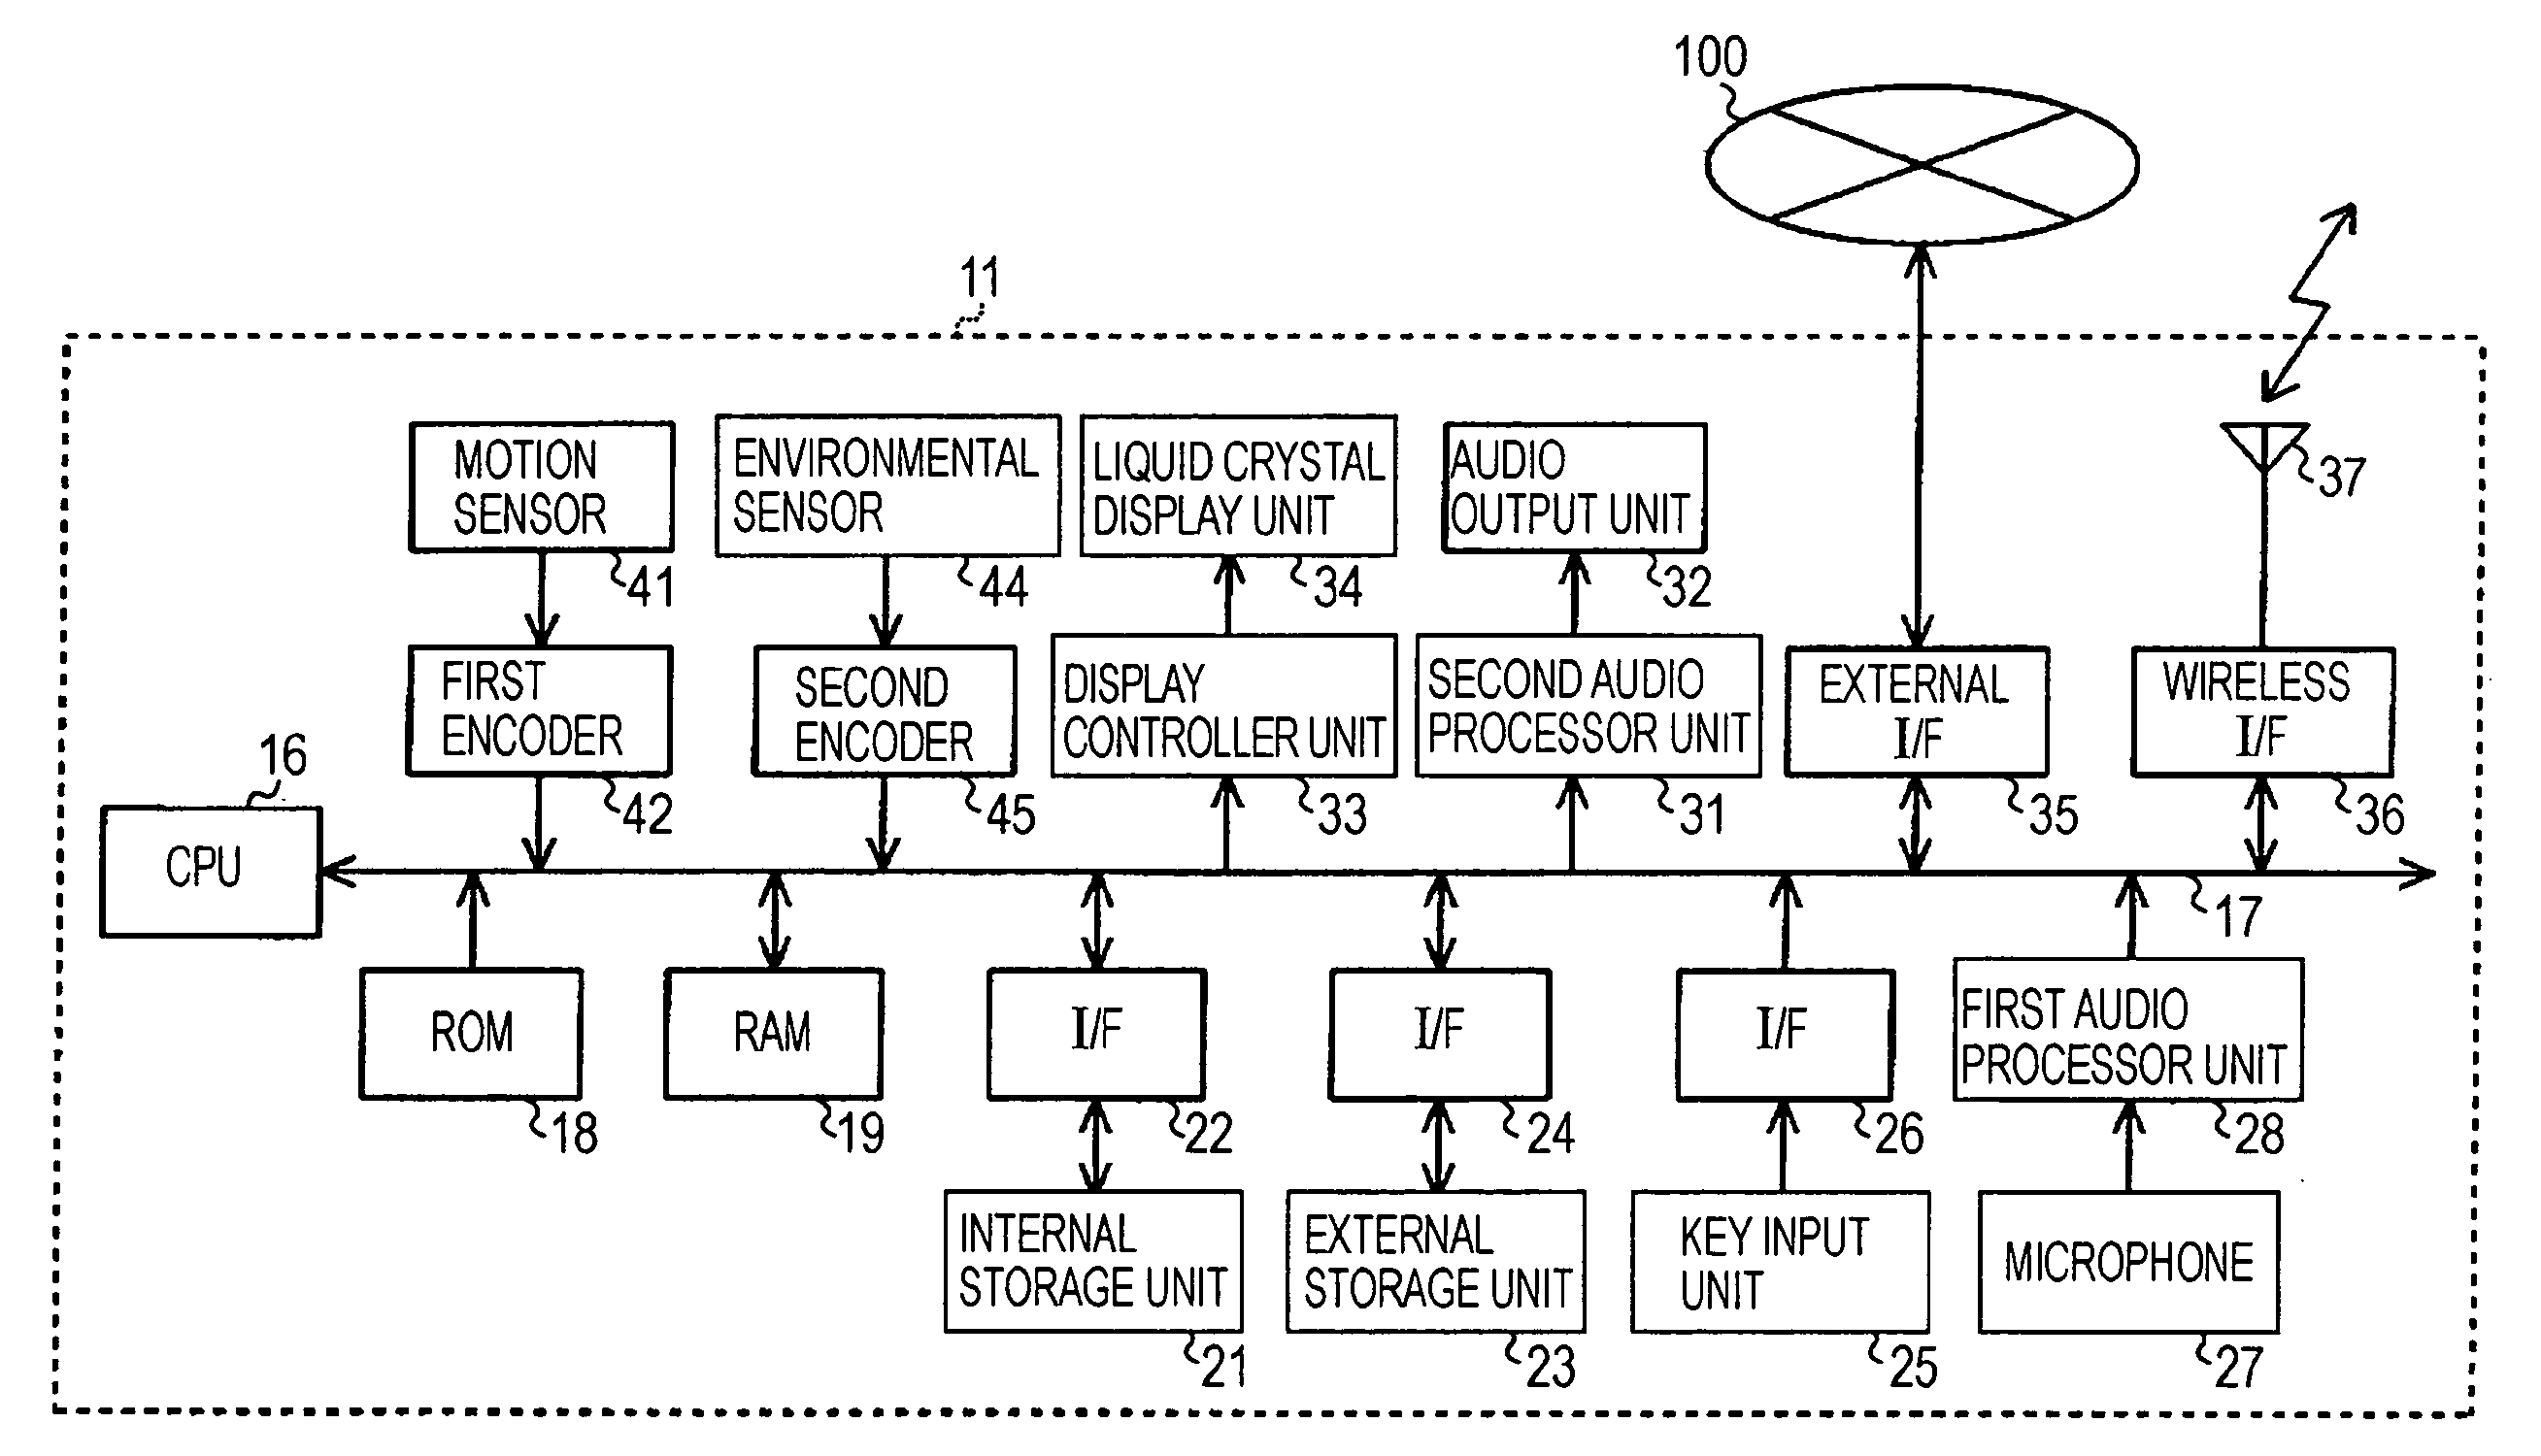 Method of retrieving and selecting content, content playback apparatus, and search server